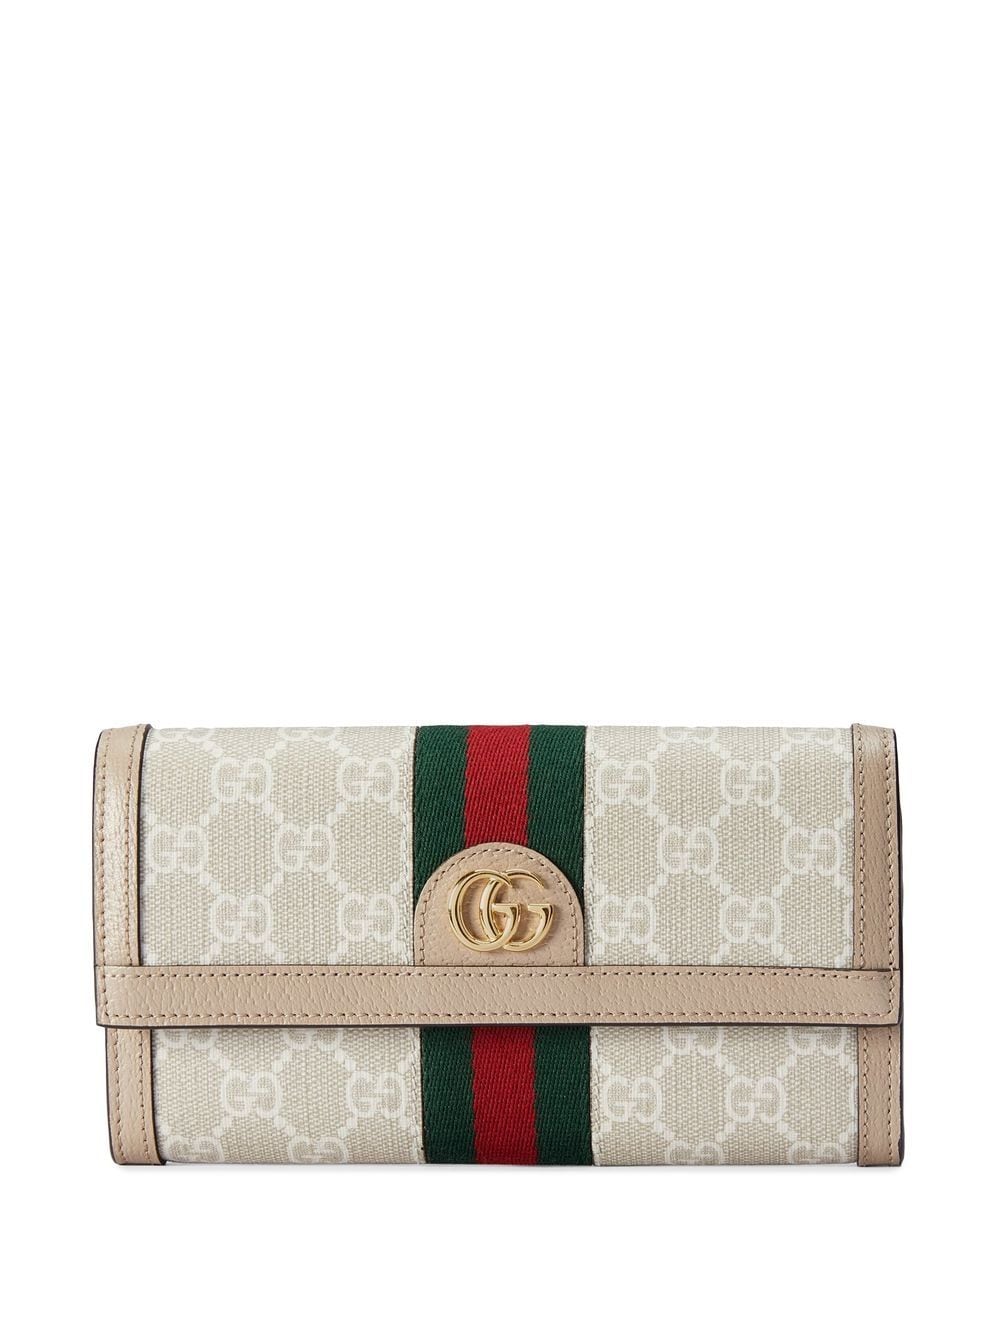 Gucci Ophidia GG continental wallet - White